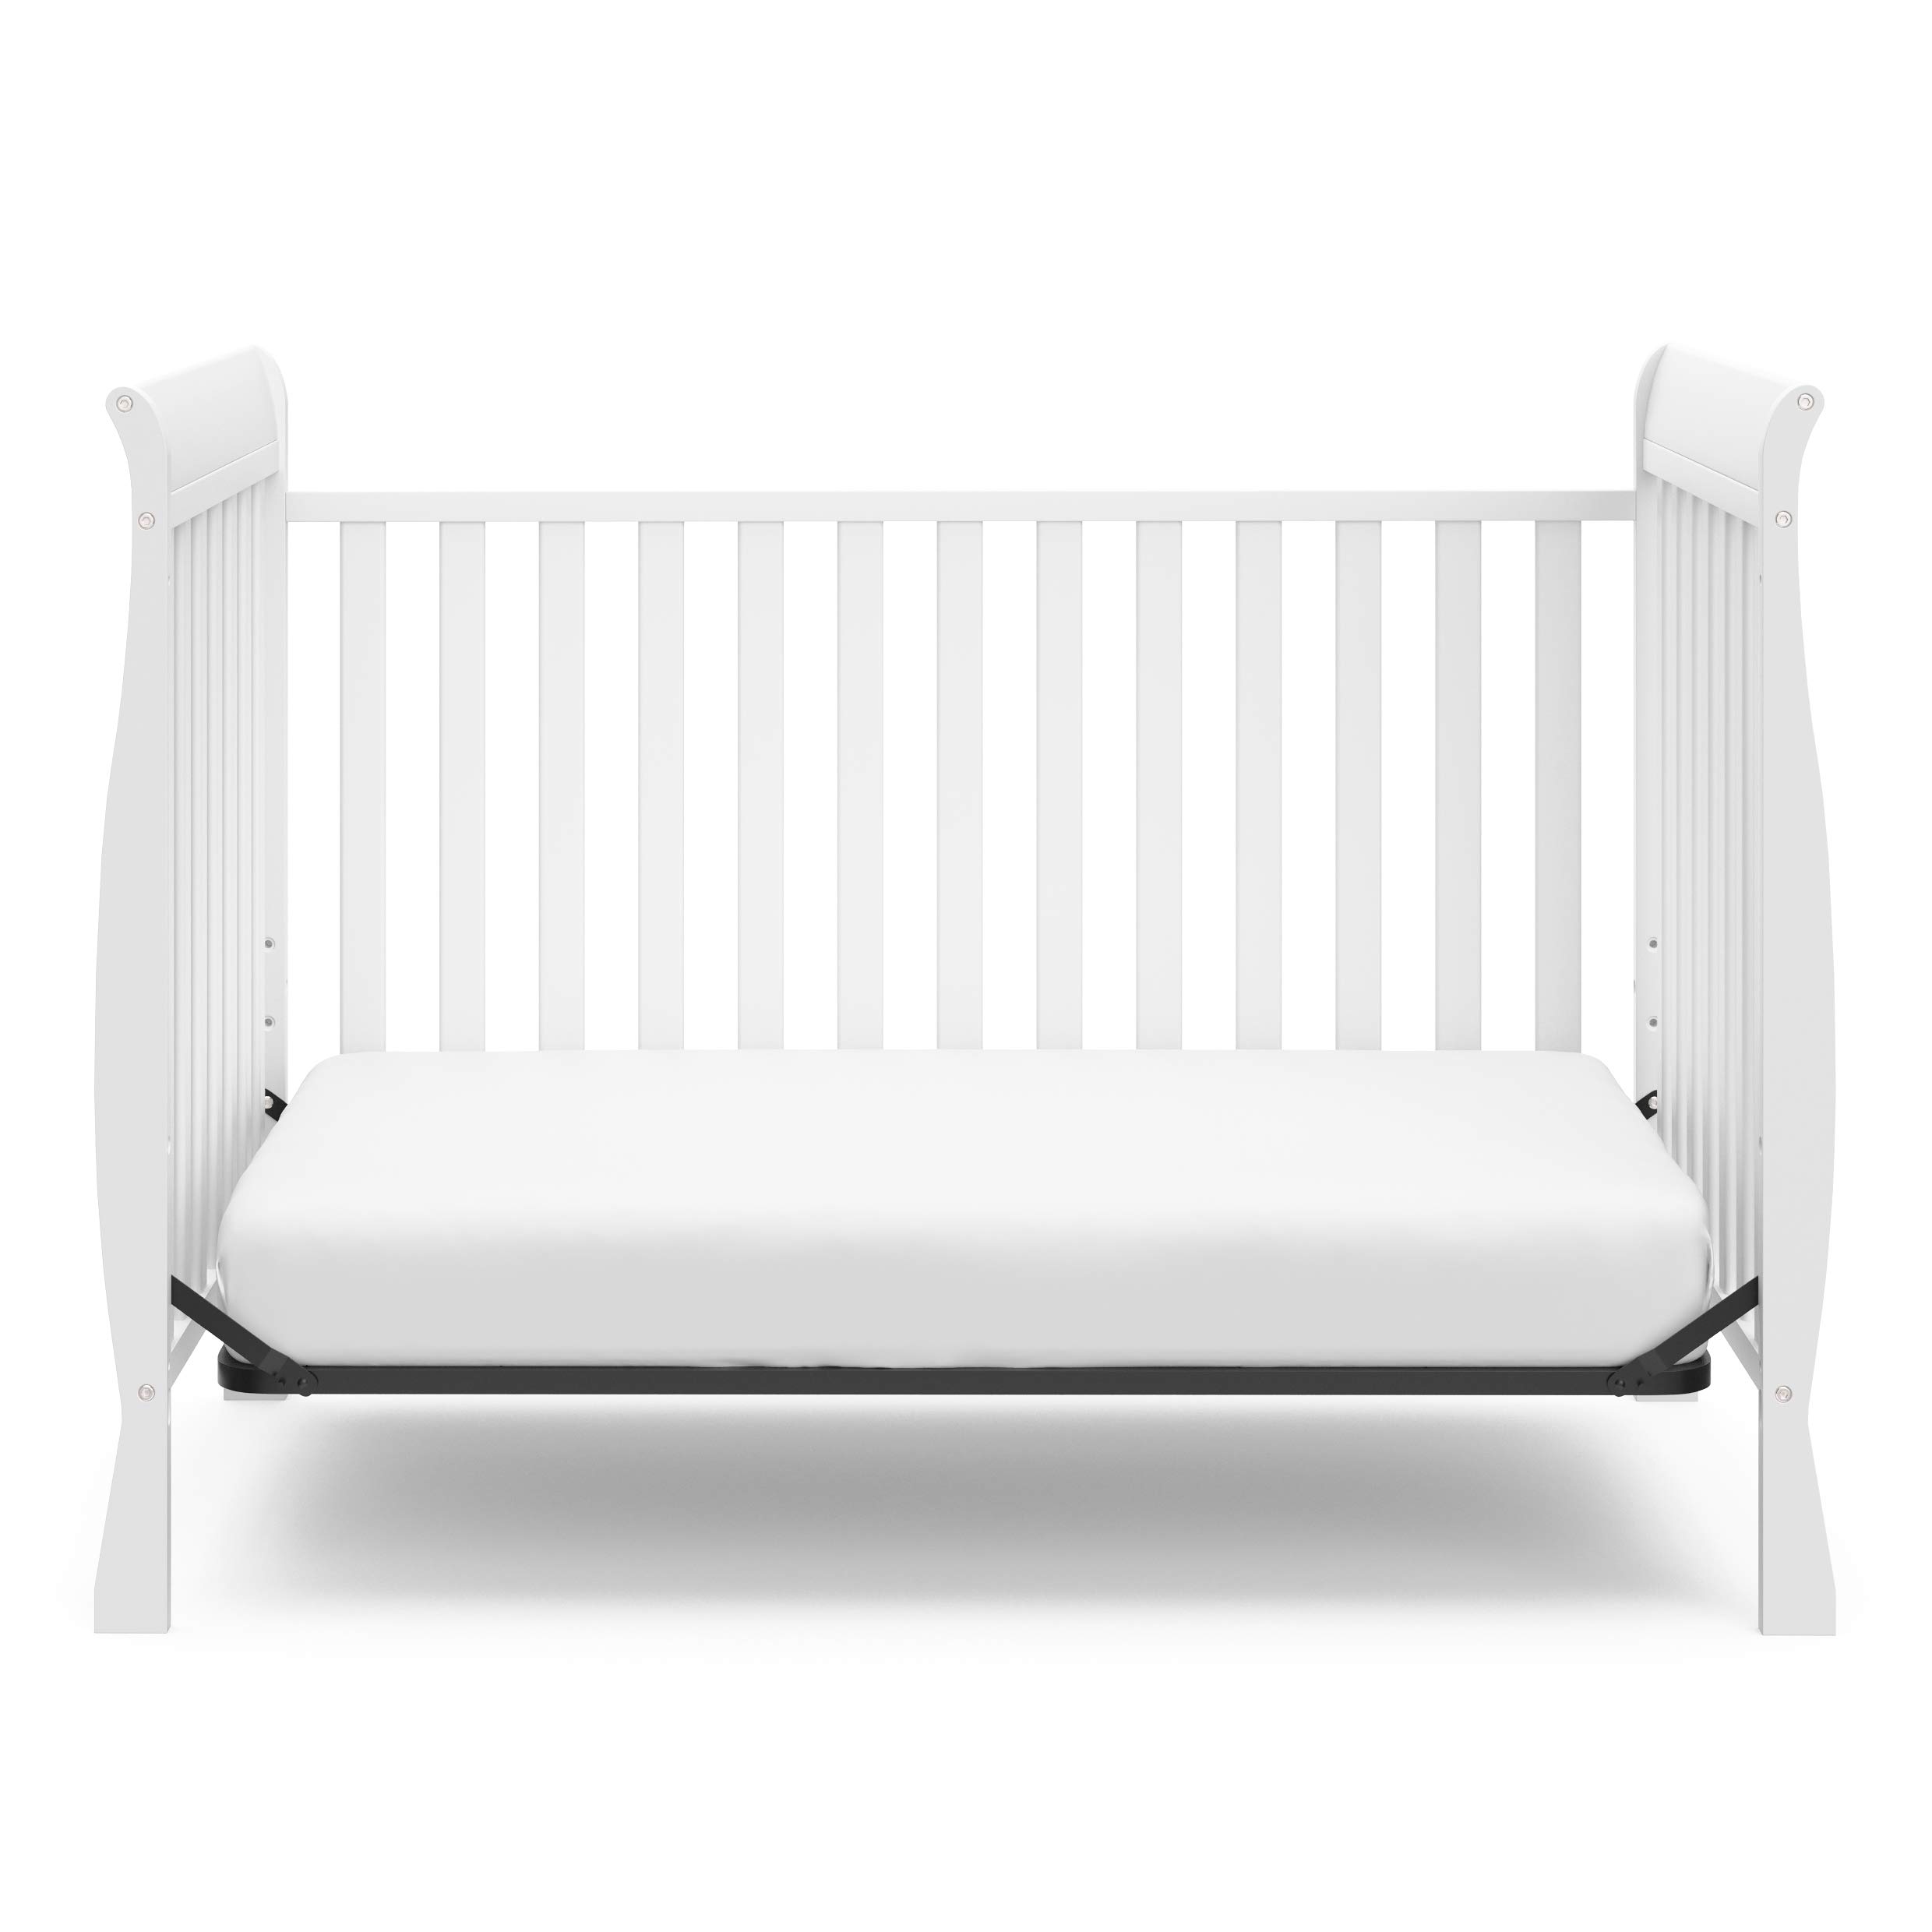 Graco Storkcraft Maxwell Convertible Crib (White) – GREENGUARD Gold Certified, Converts to Toddler Bed and Daybed, Fits Standard Full-Size Crib Mattress, Classic Crib with Traditional Sleigh Design